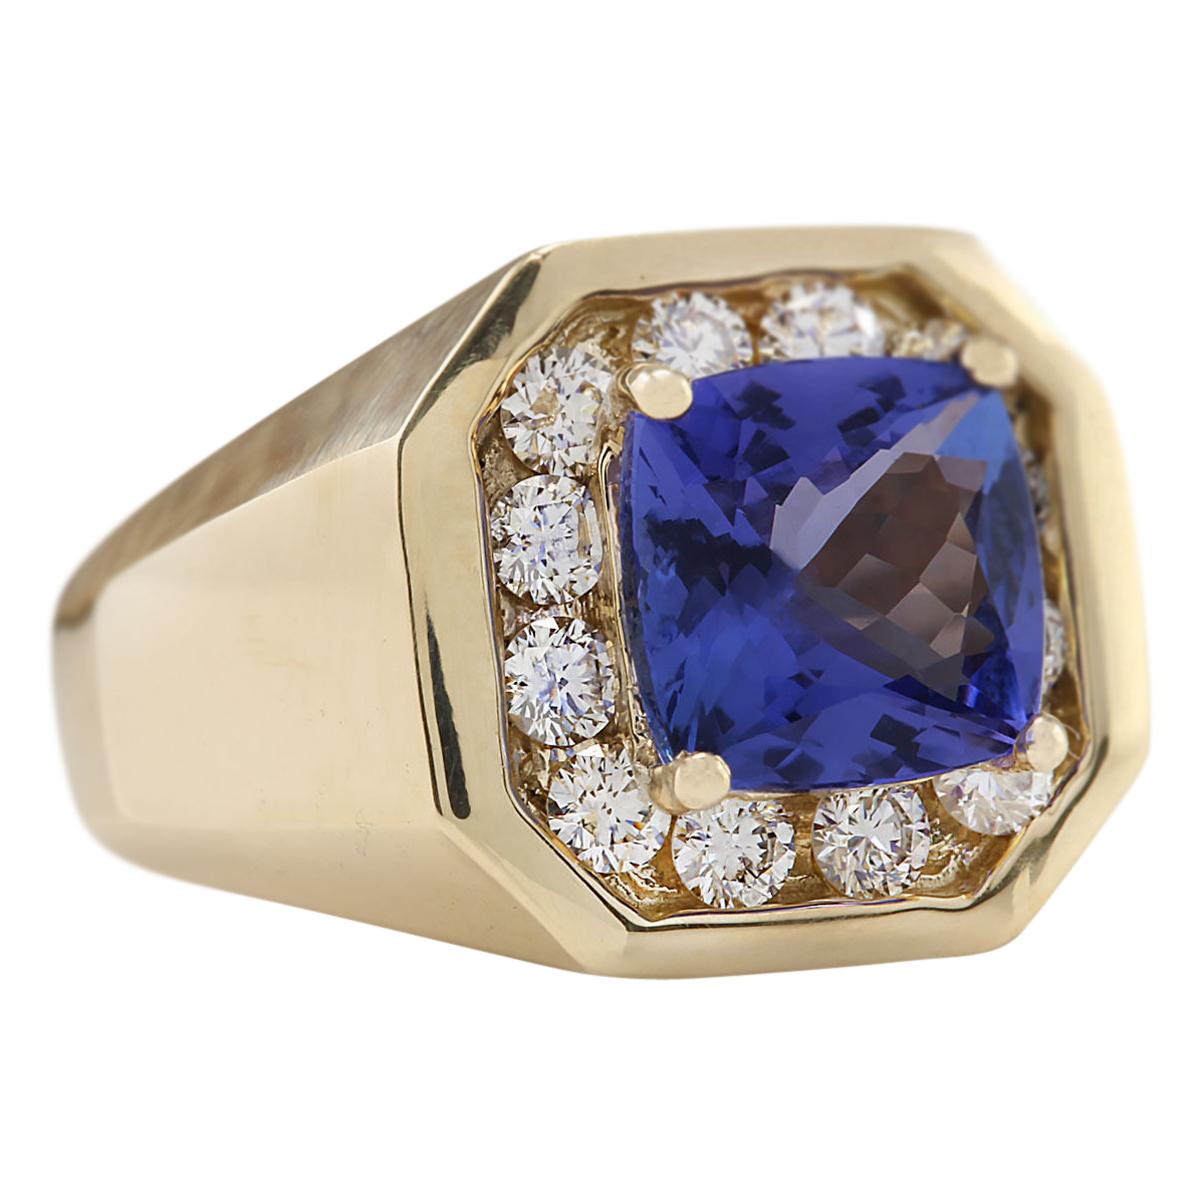 Stamped: 18K Yellow Gold<br>Total Ring Weight: 13.5 Grams<br>Ring Length: N/A<br>Ring Width: N/A<br>Gemstone Weight: Total Natural Tanzanite Weight is 3.24 Carat (Measures: 8.40x8.30 mm)<br>Color: Blue<br>Diamond Weight: Total Natural Diamond Weight